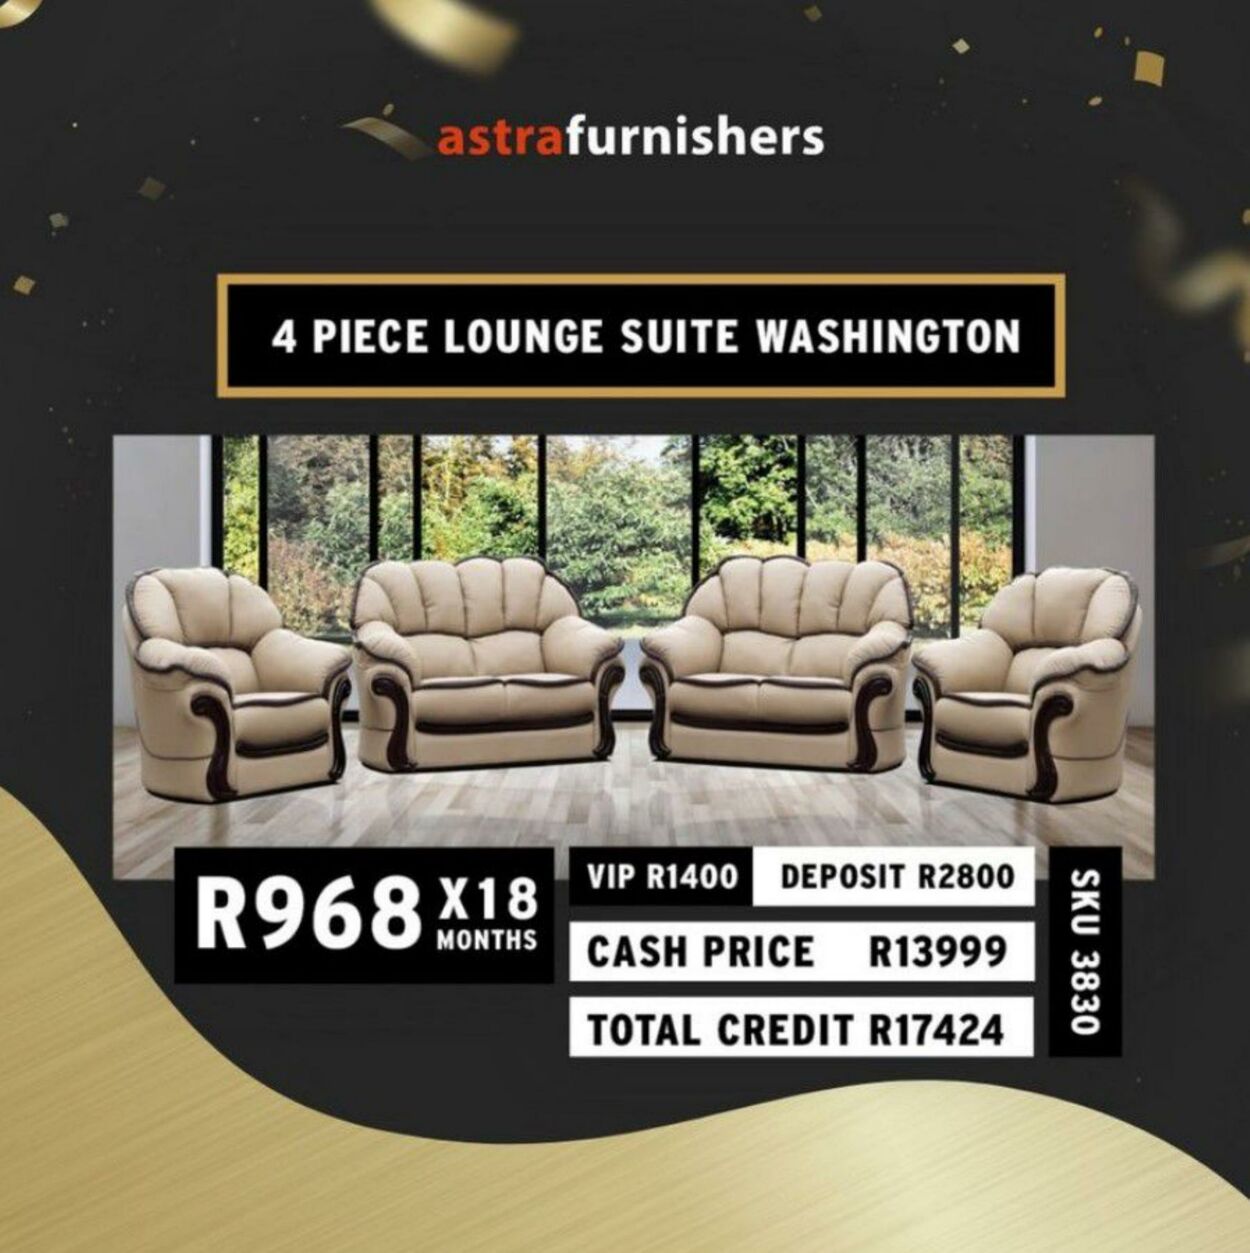 Special Astra Furnishers 23.05.2022 - 22.08.2022